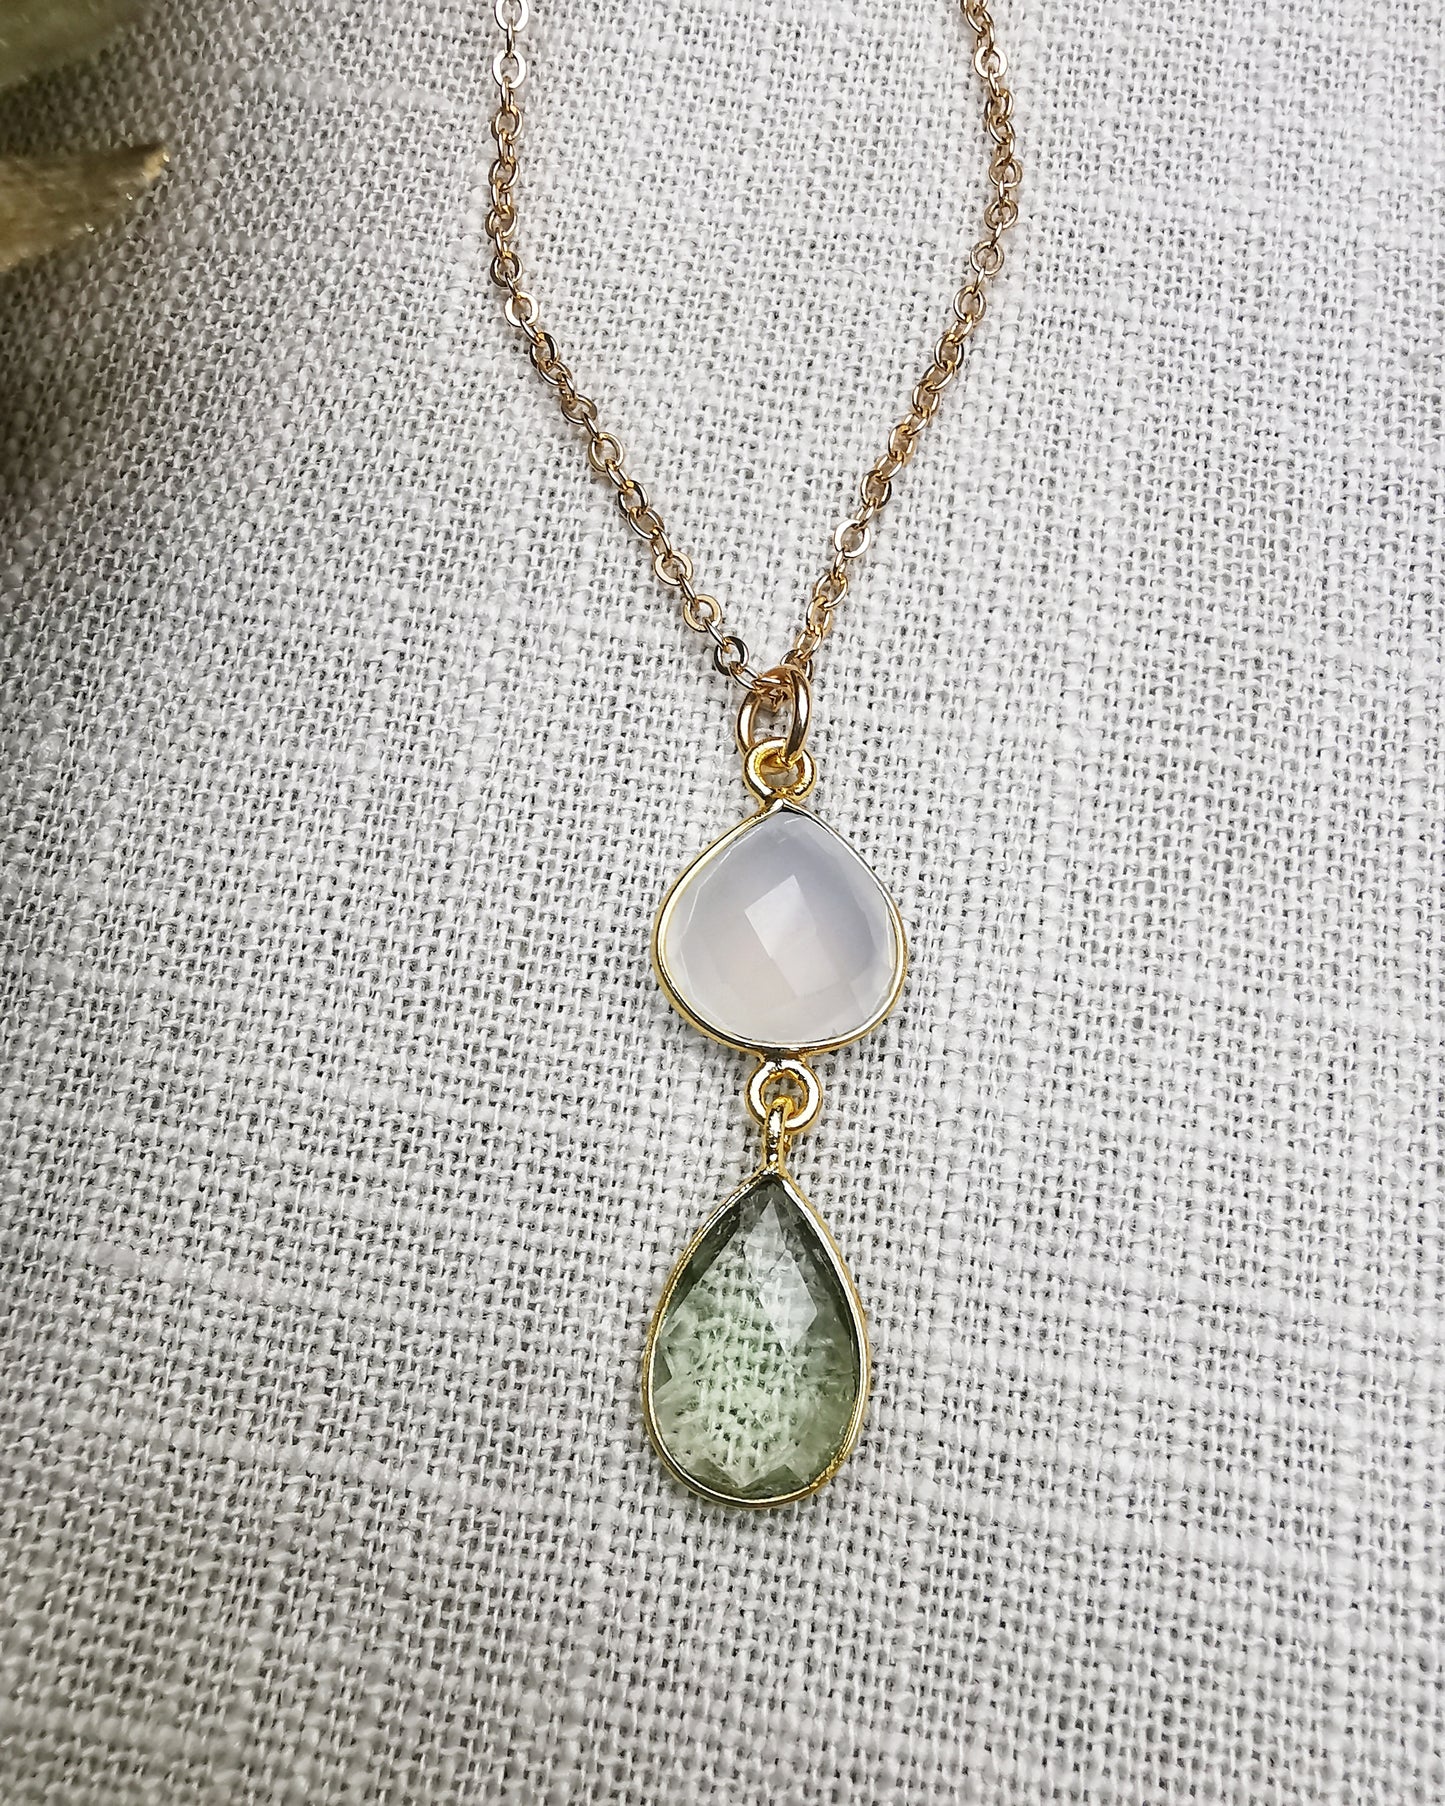 White Chalcedony + Green Amethyst Pendant Necklace.